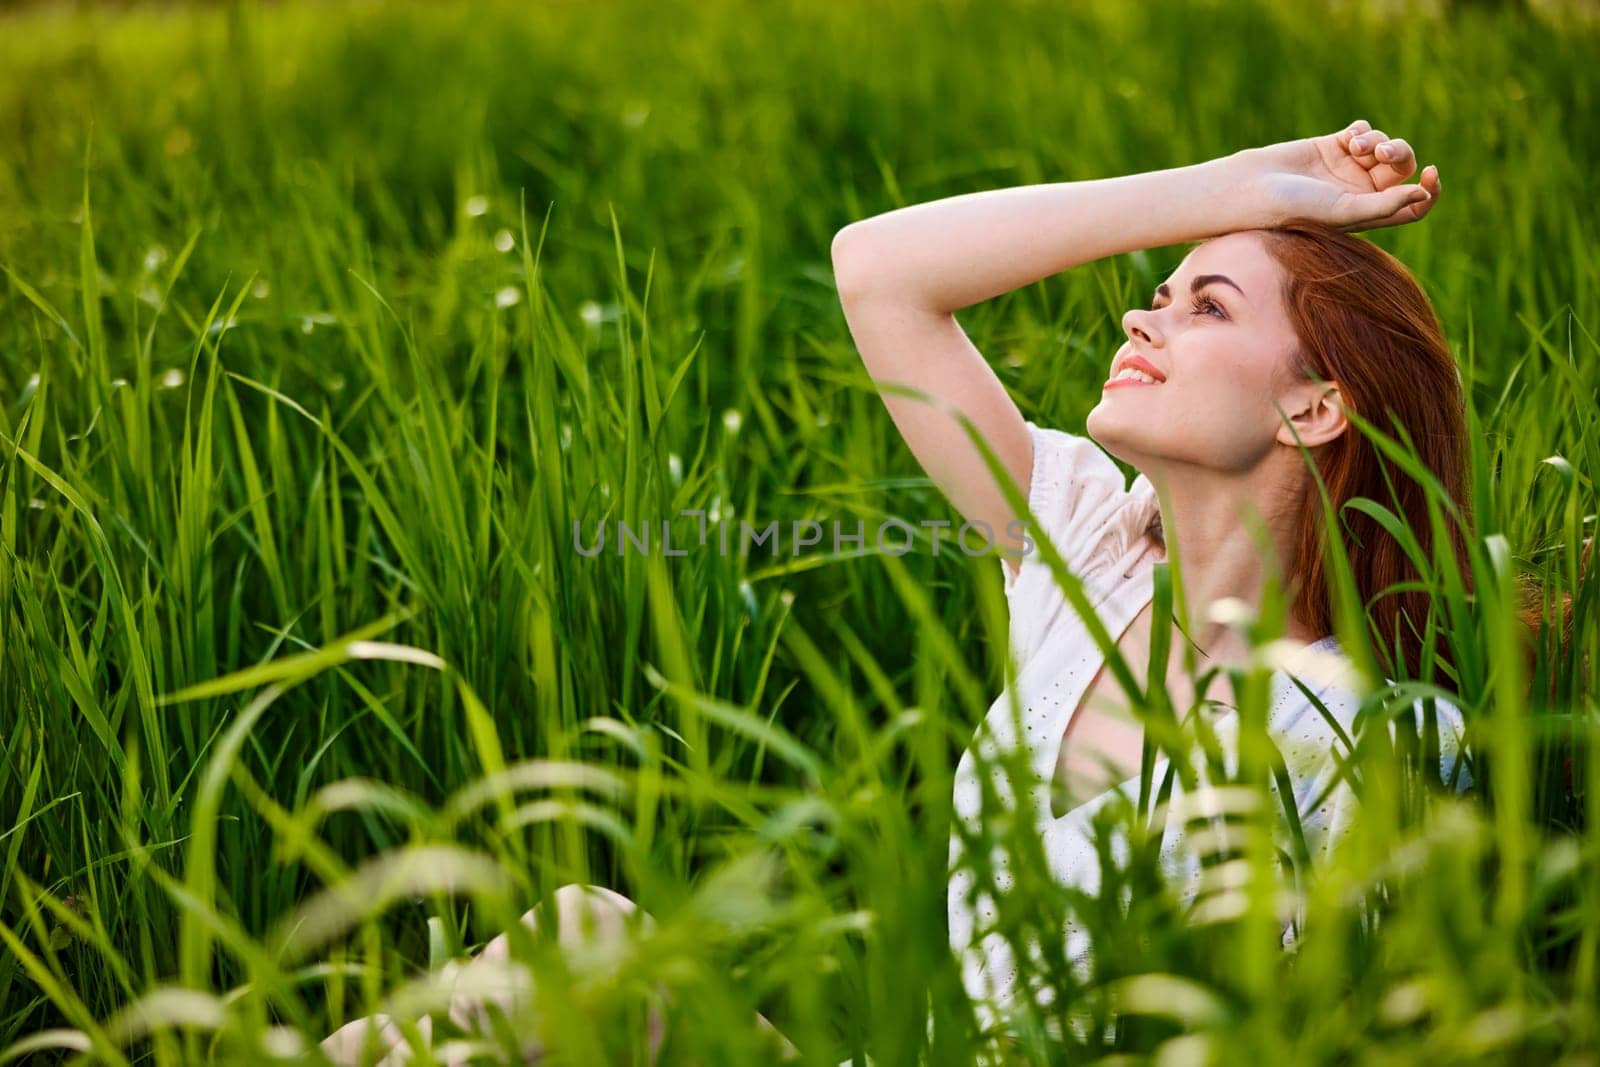 cute woman with red hair sits in tall green grass with her hand on her head. High quality photo